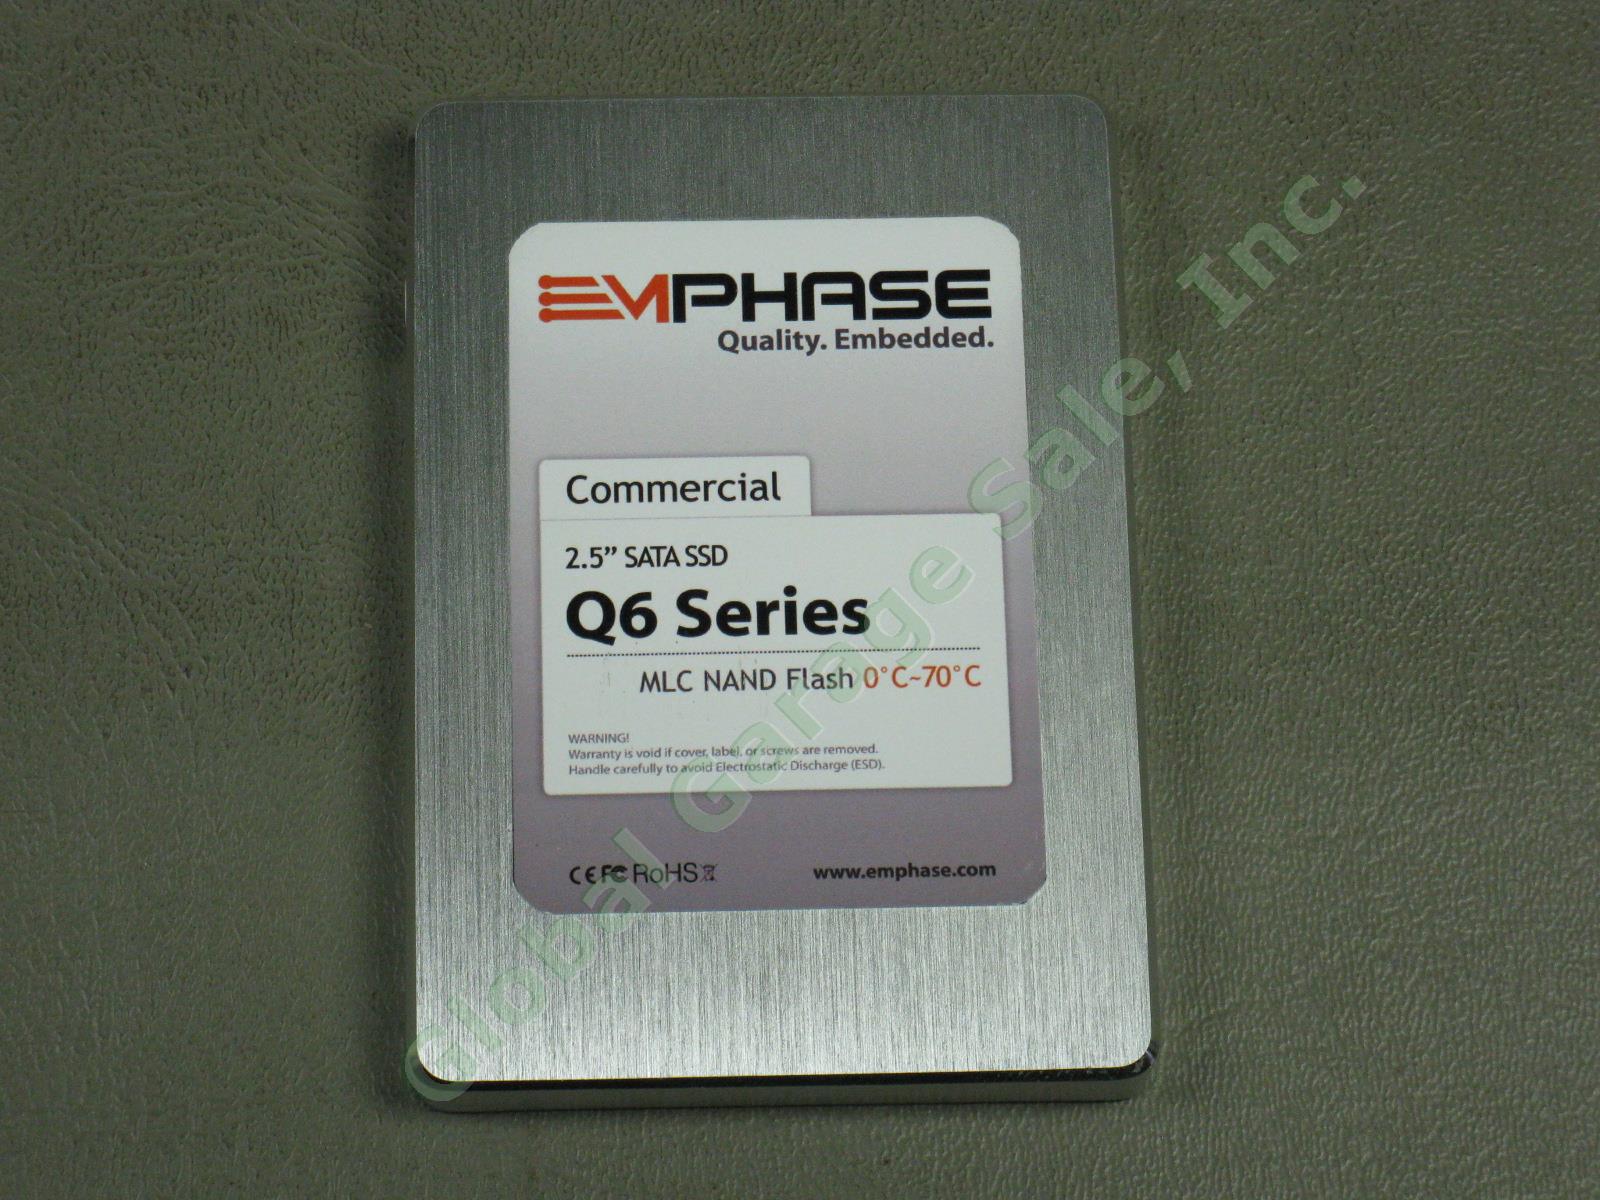 10 Emphase Q6 60GB SSD SATA3 Industrial 2.5 MLC NAND Flash Solid State Drive Lot 2